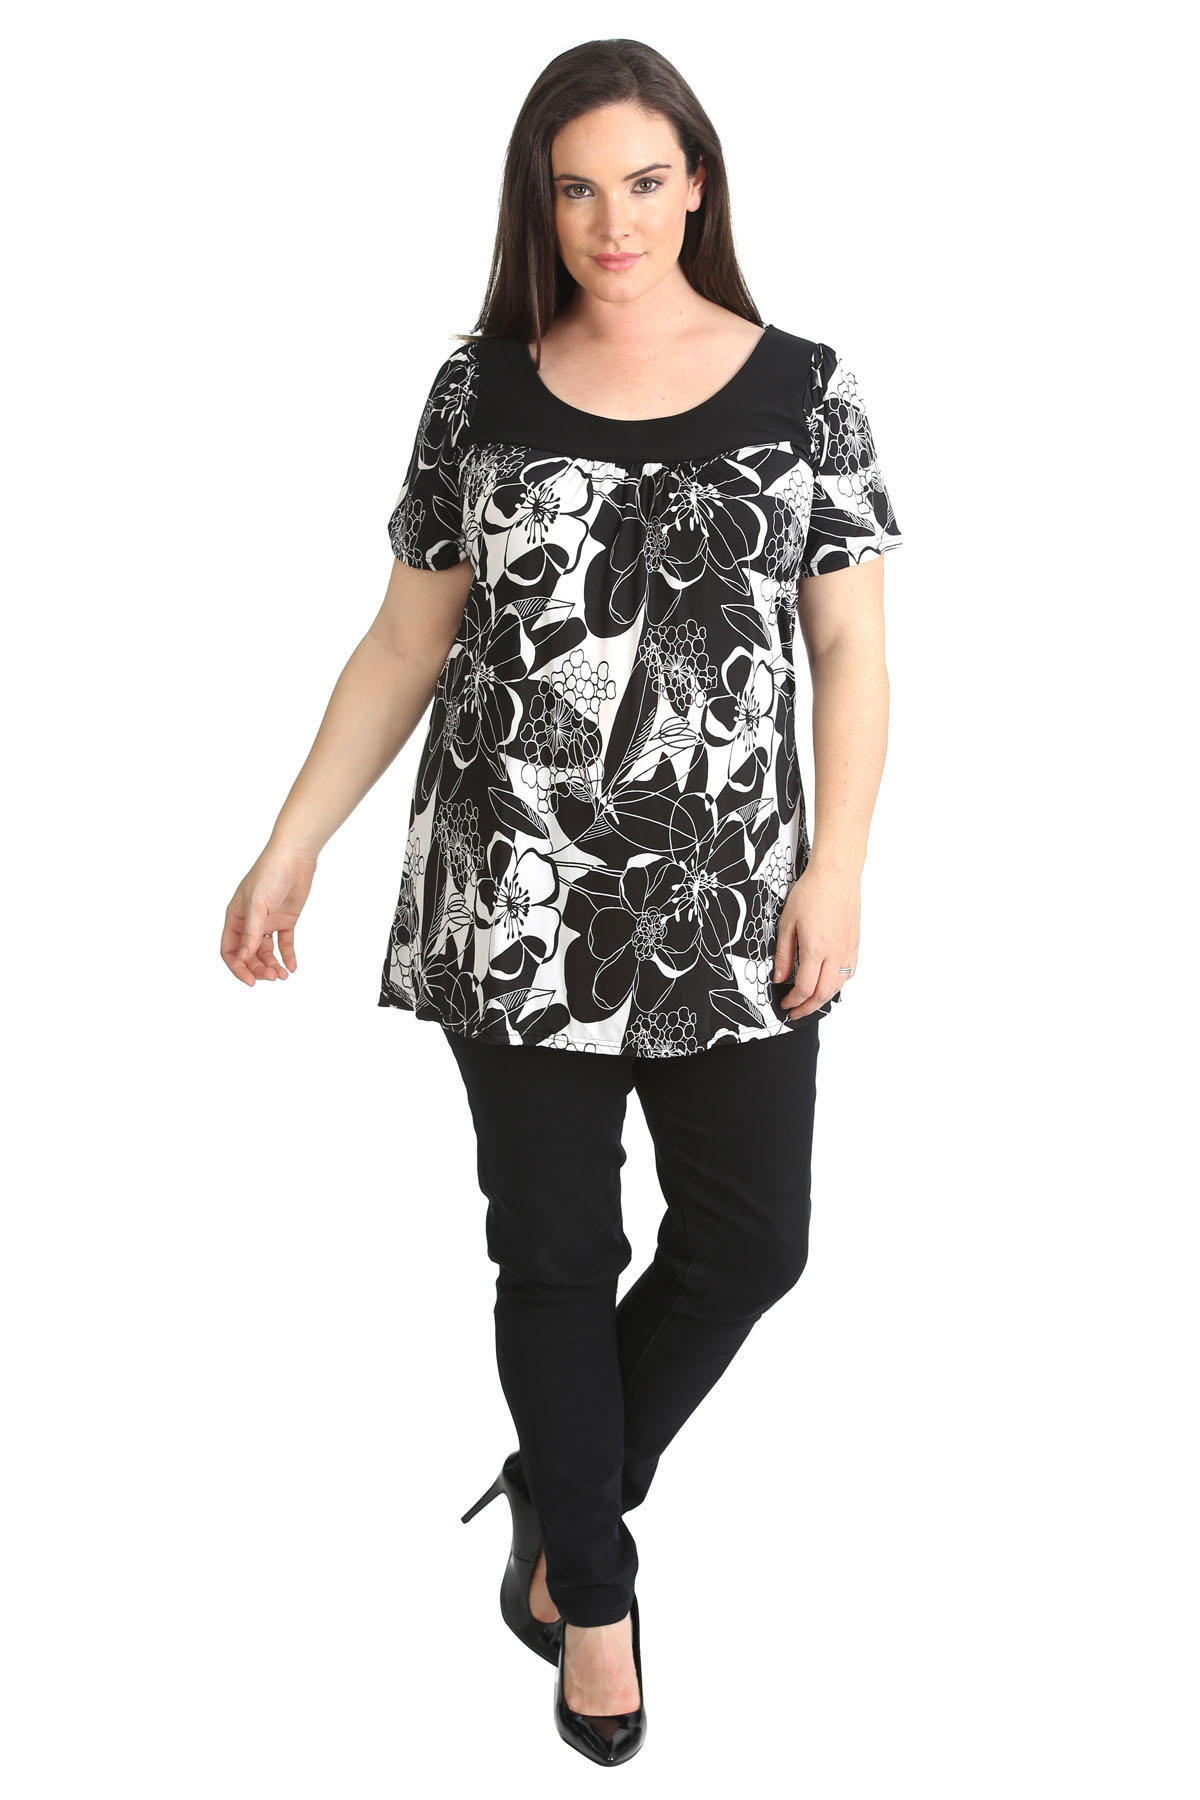 New Womens Plus Size Top Ladies Floral Print Tunic Stretch Smock Top ...